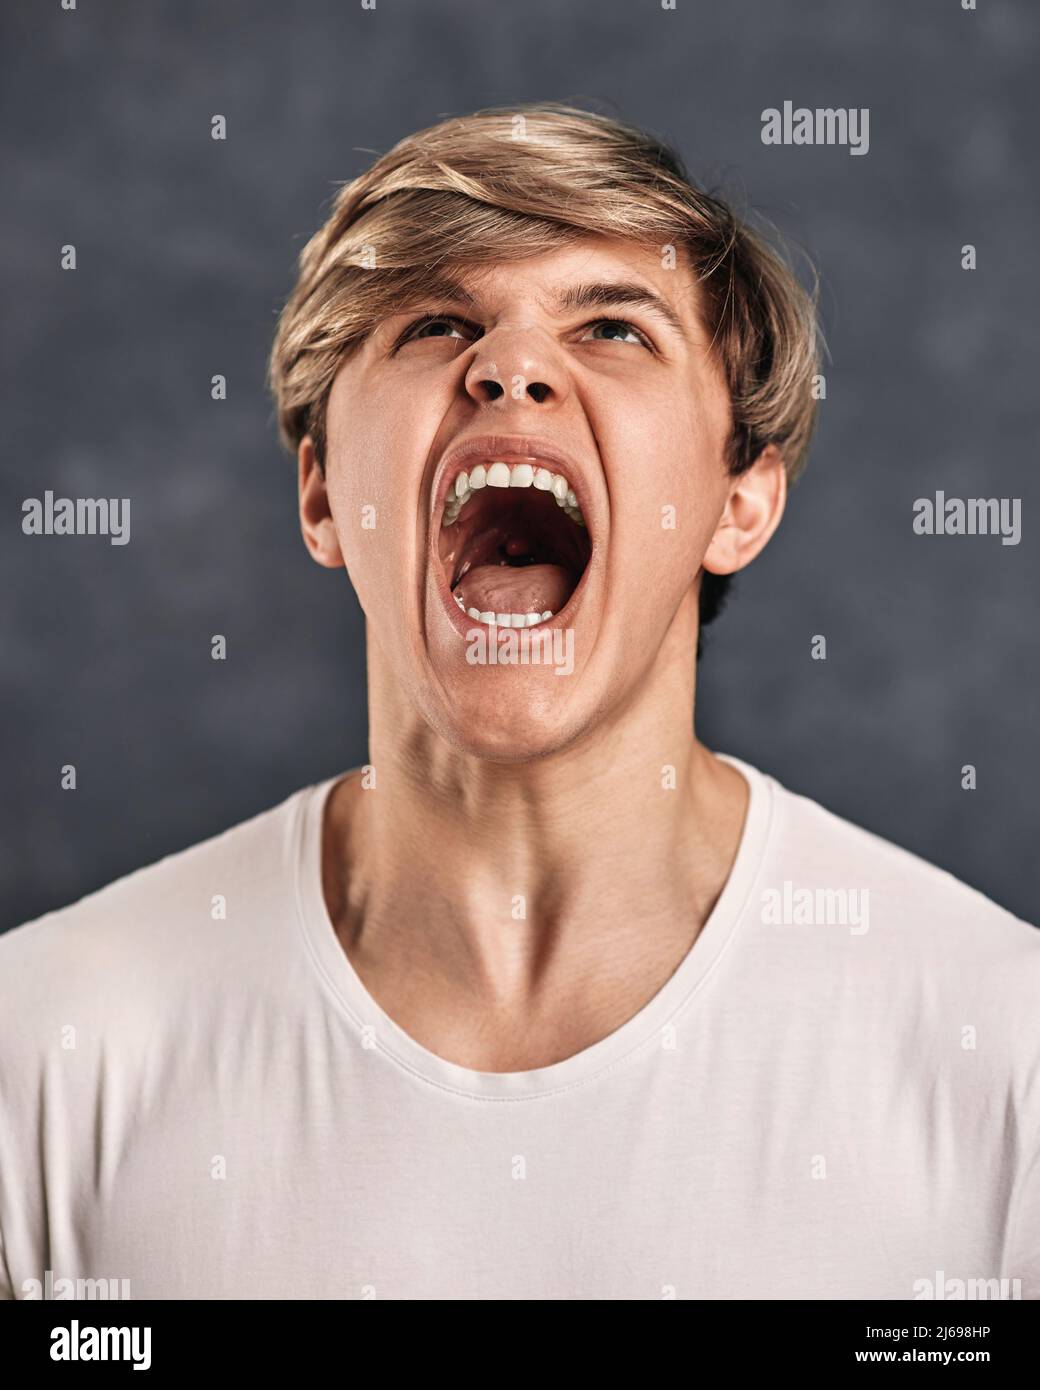 Furious, enraged young man over gray background Stock Photo